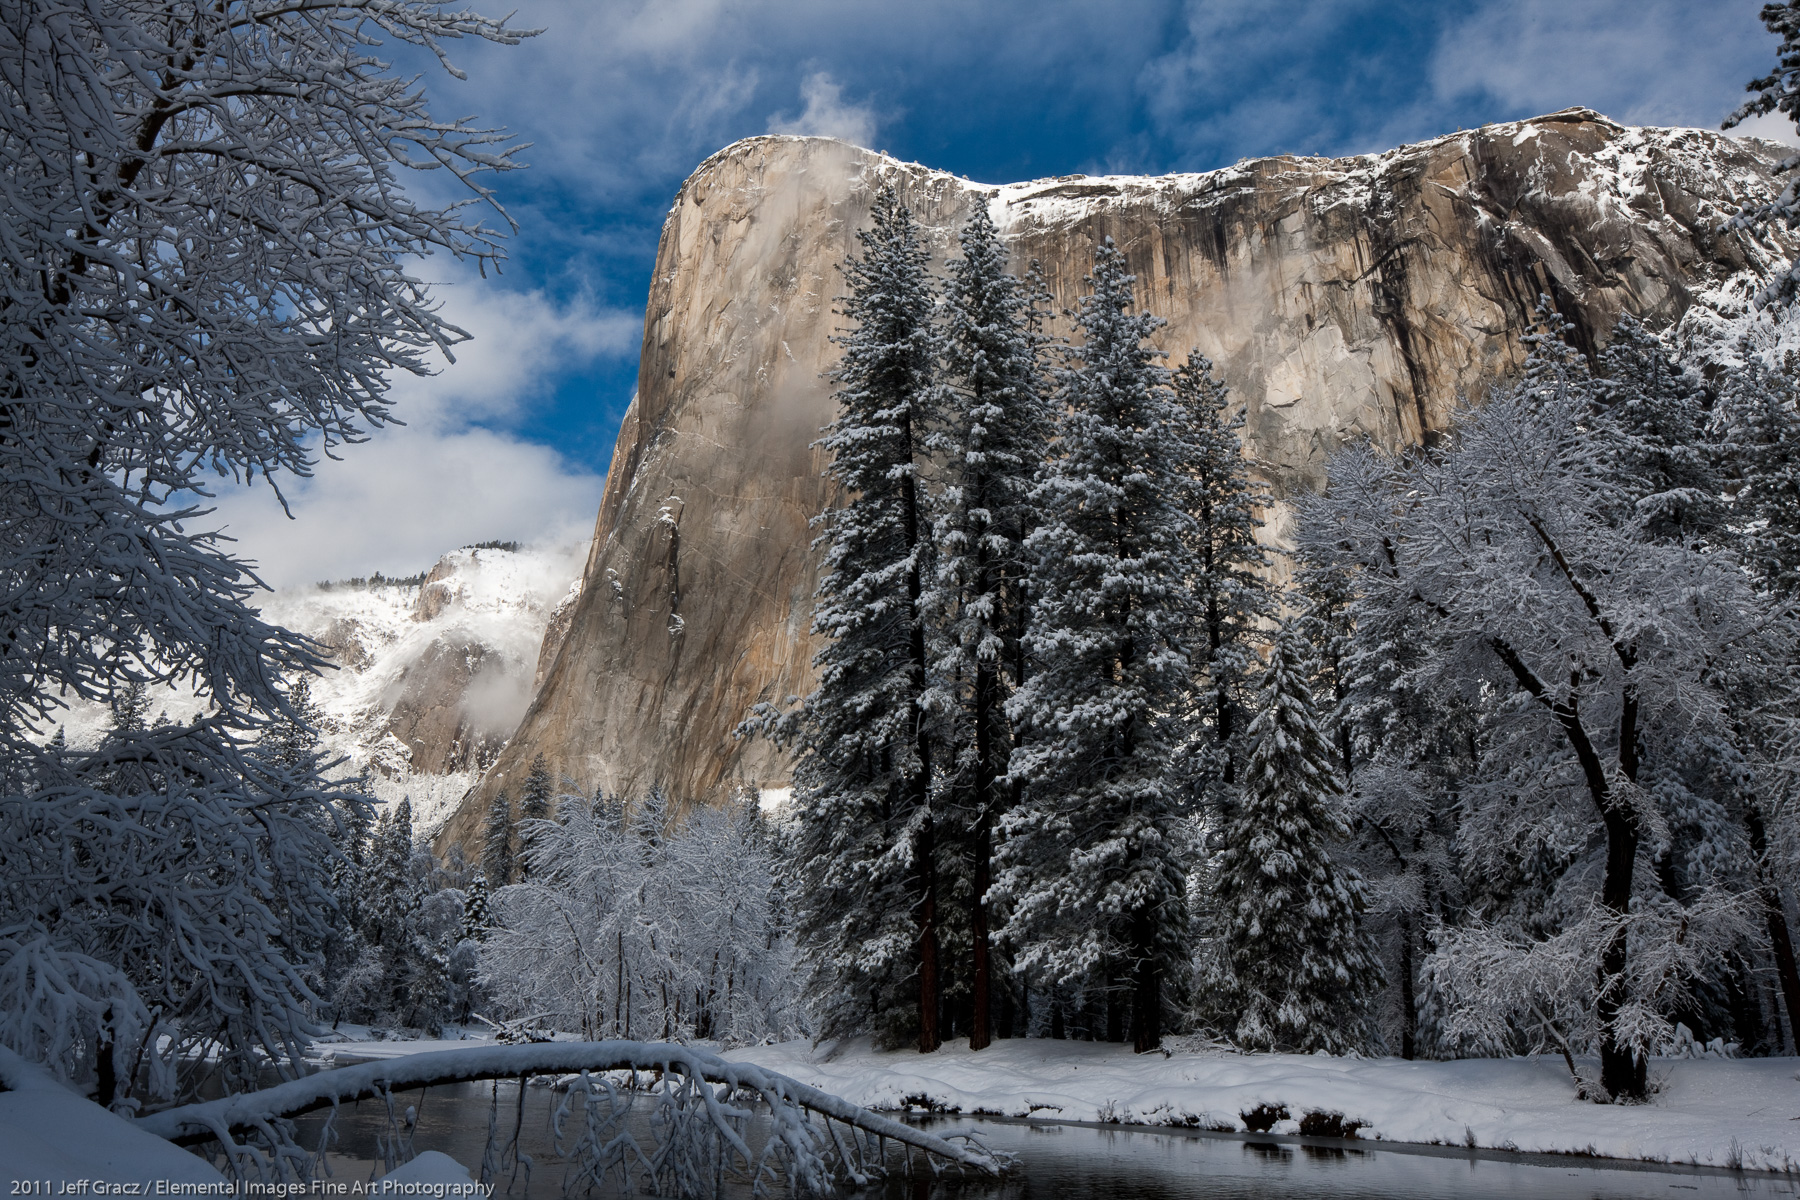 El Capitan from Cathedral Beach | Yosemite National Park | CA | USA - © 2011 Jeff Gracz / Elemental Images Fine Art Photography - All Rights Reserved Worldwide